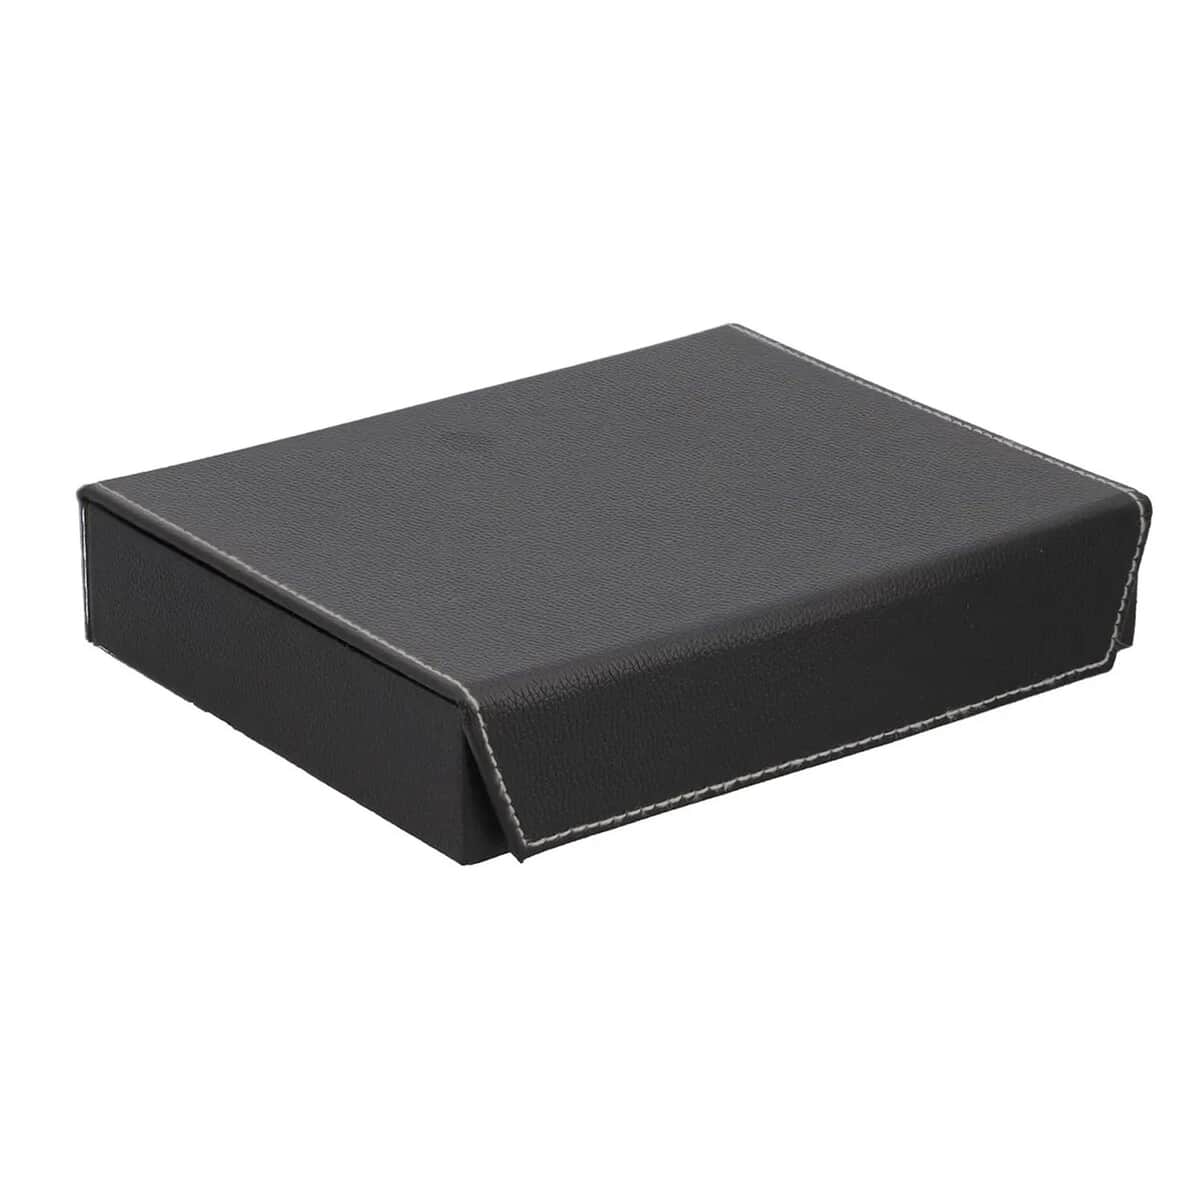 Black Eco Leatherette Ring Box (Approx. 60 Rings), Jewelry Roll Organizer, Jewelry Organizer, Jewelry Holder, Travel Jewelry Case, Jewelry Storage image number 0